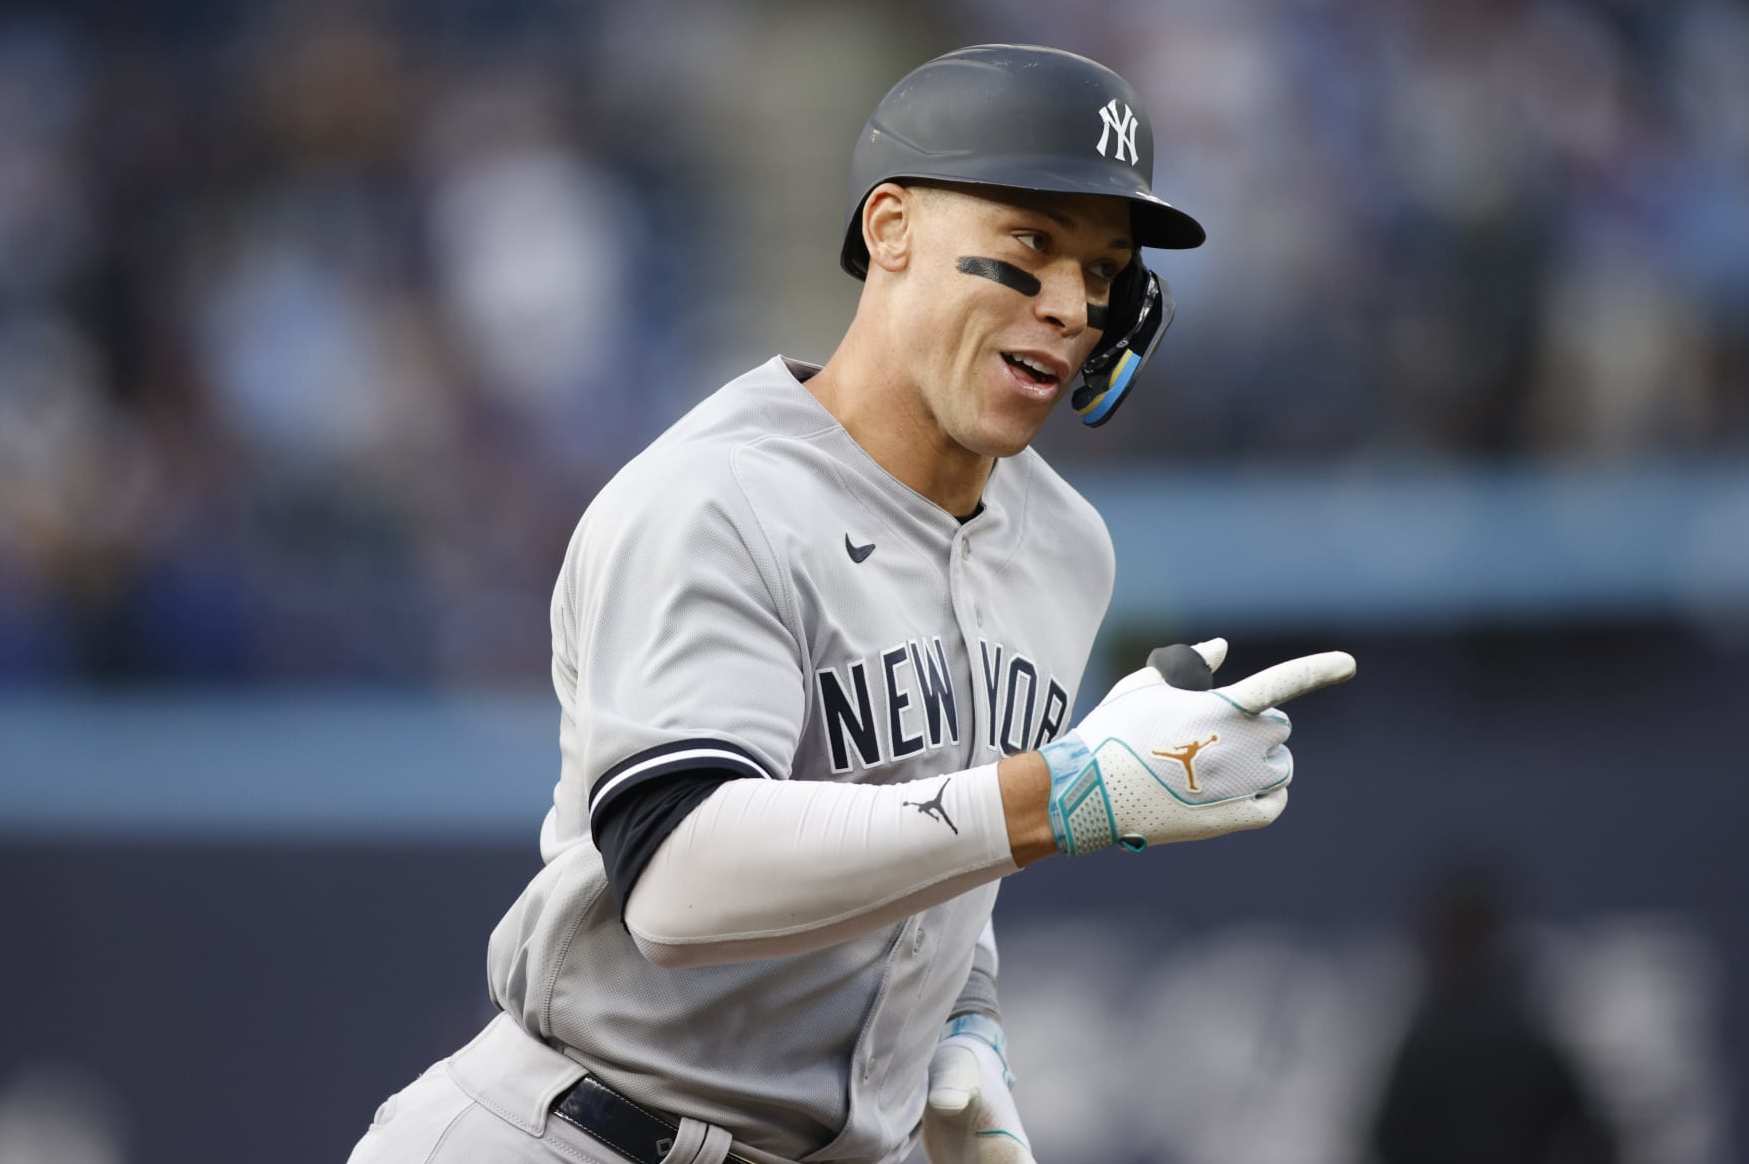 Here's Yankees' sales pitch that keeps Aaron Judge in Pinstripes